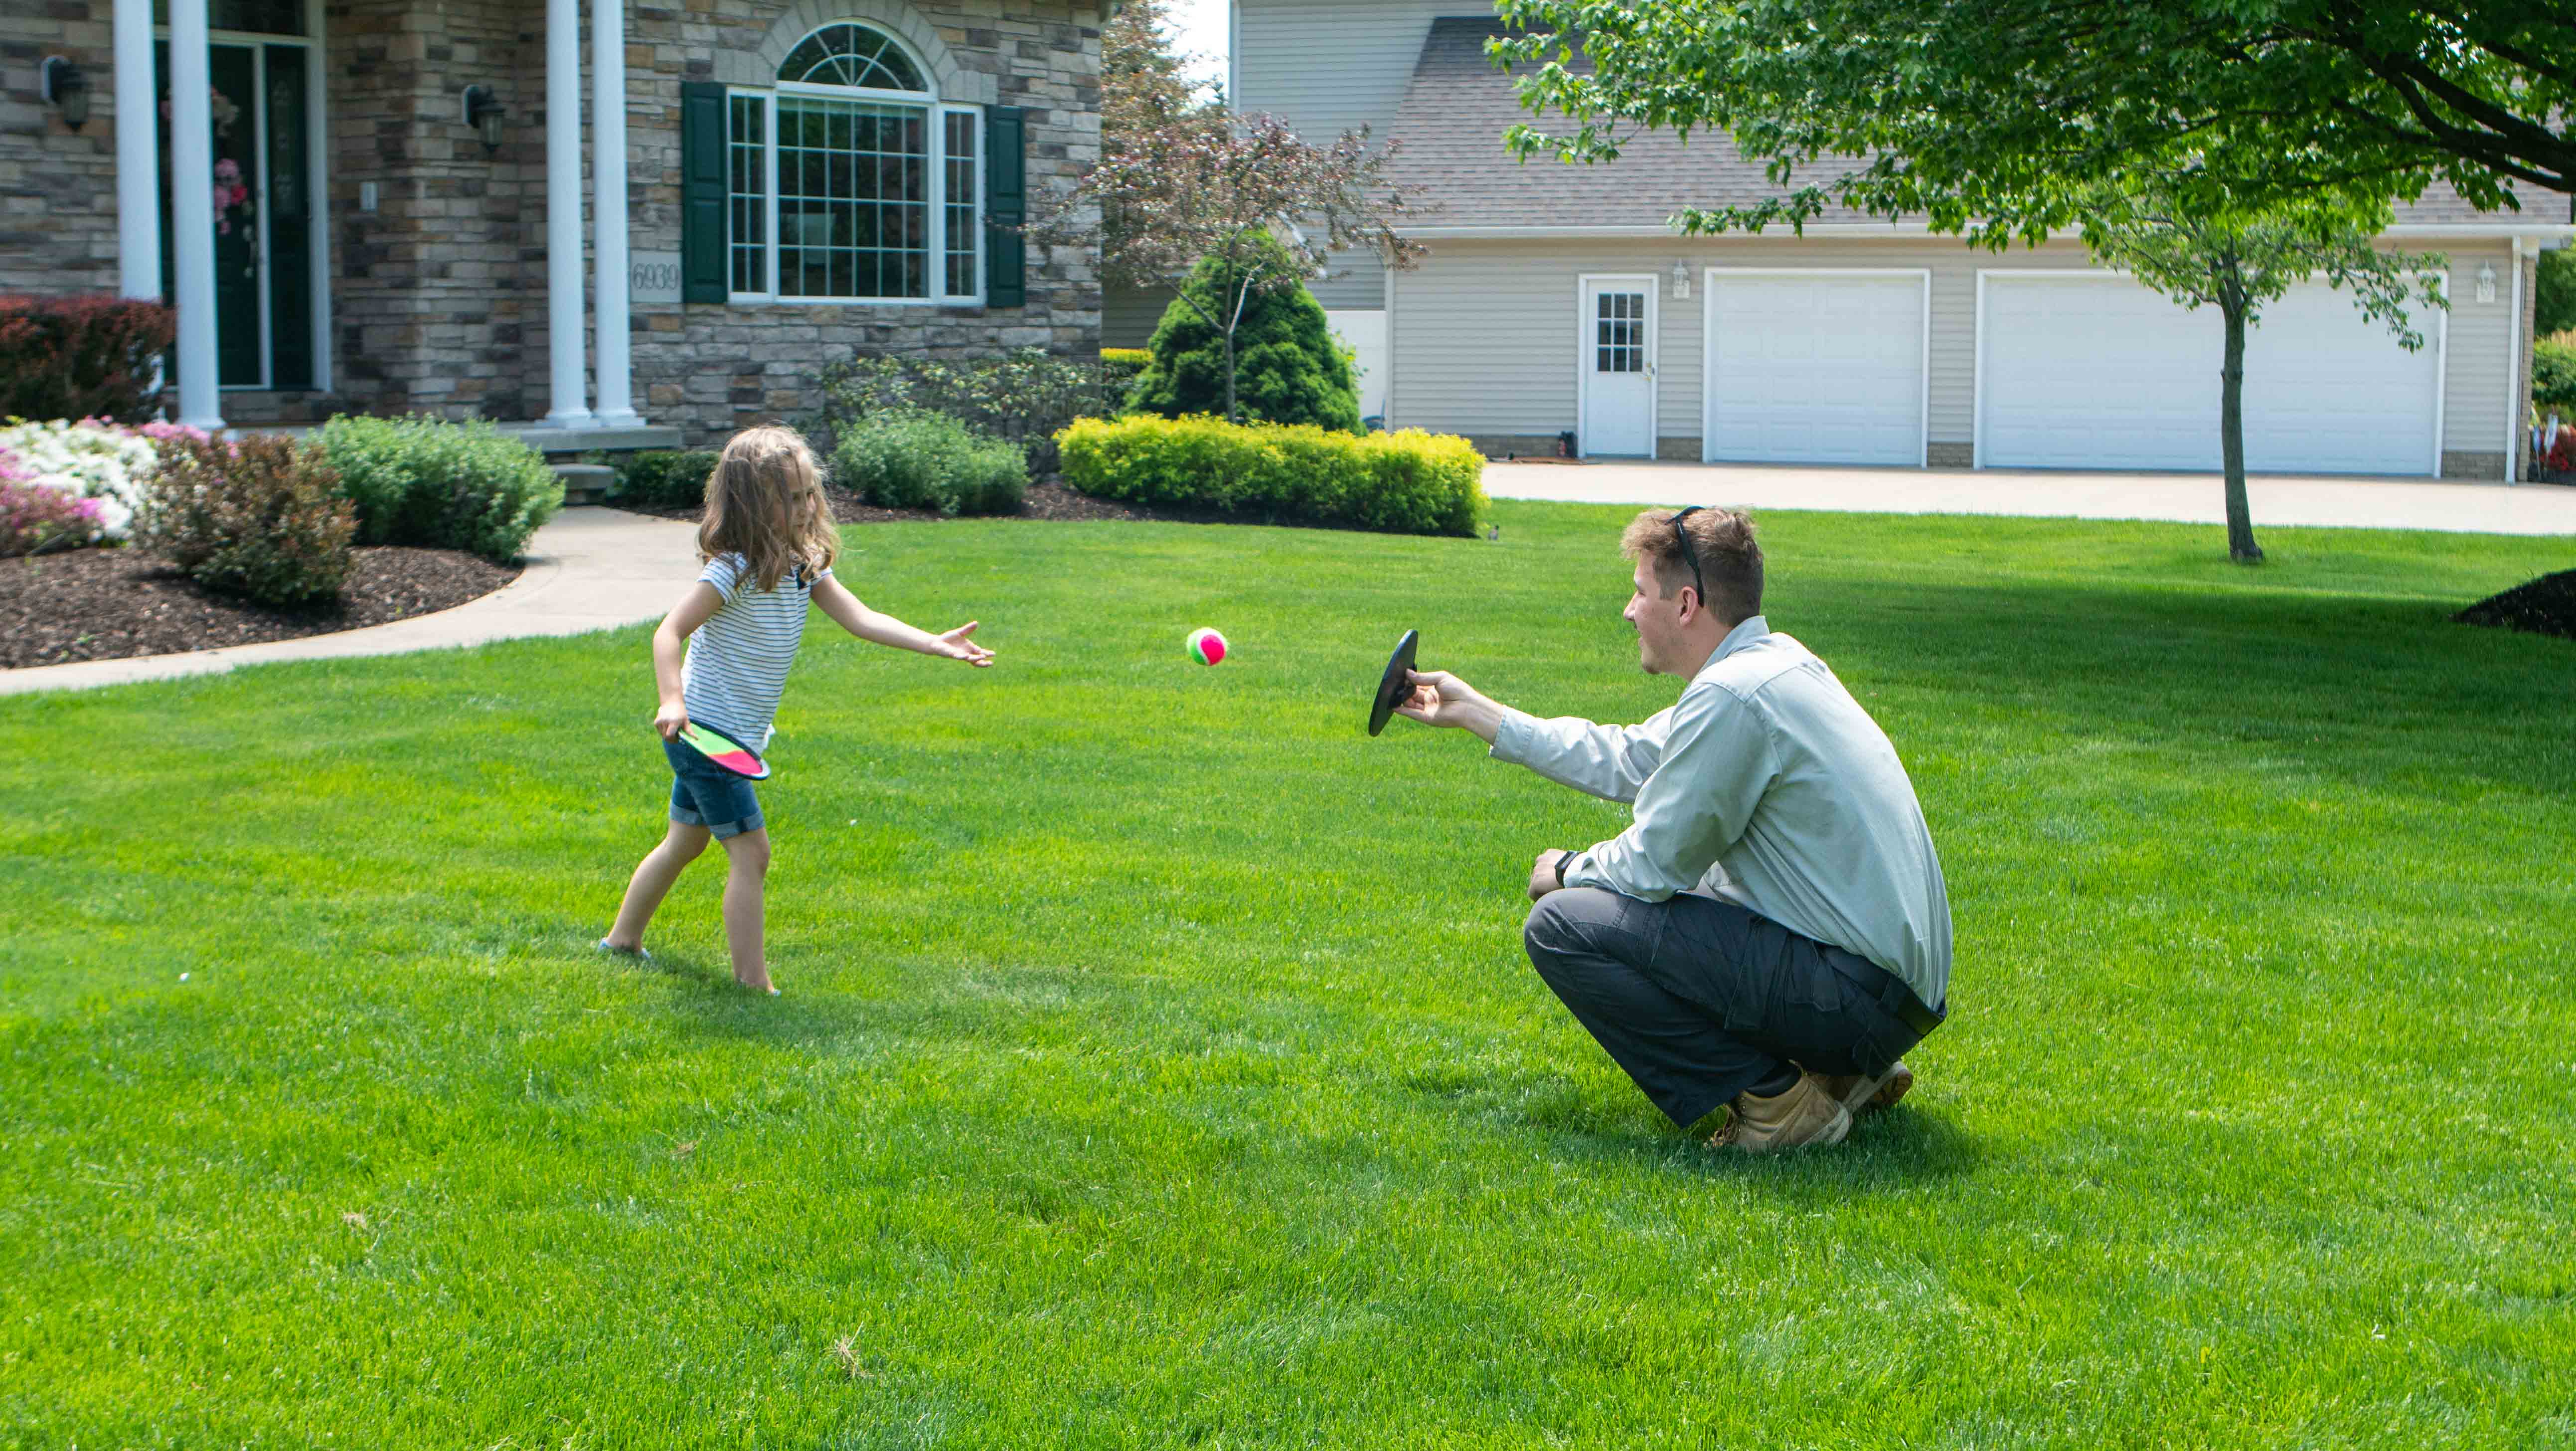 nice healthy lawn and kid